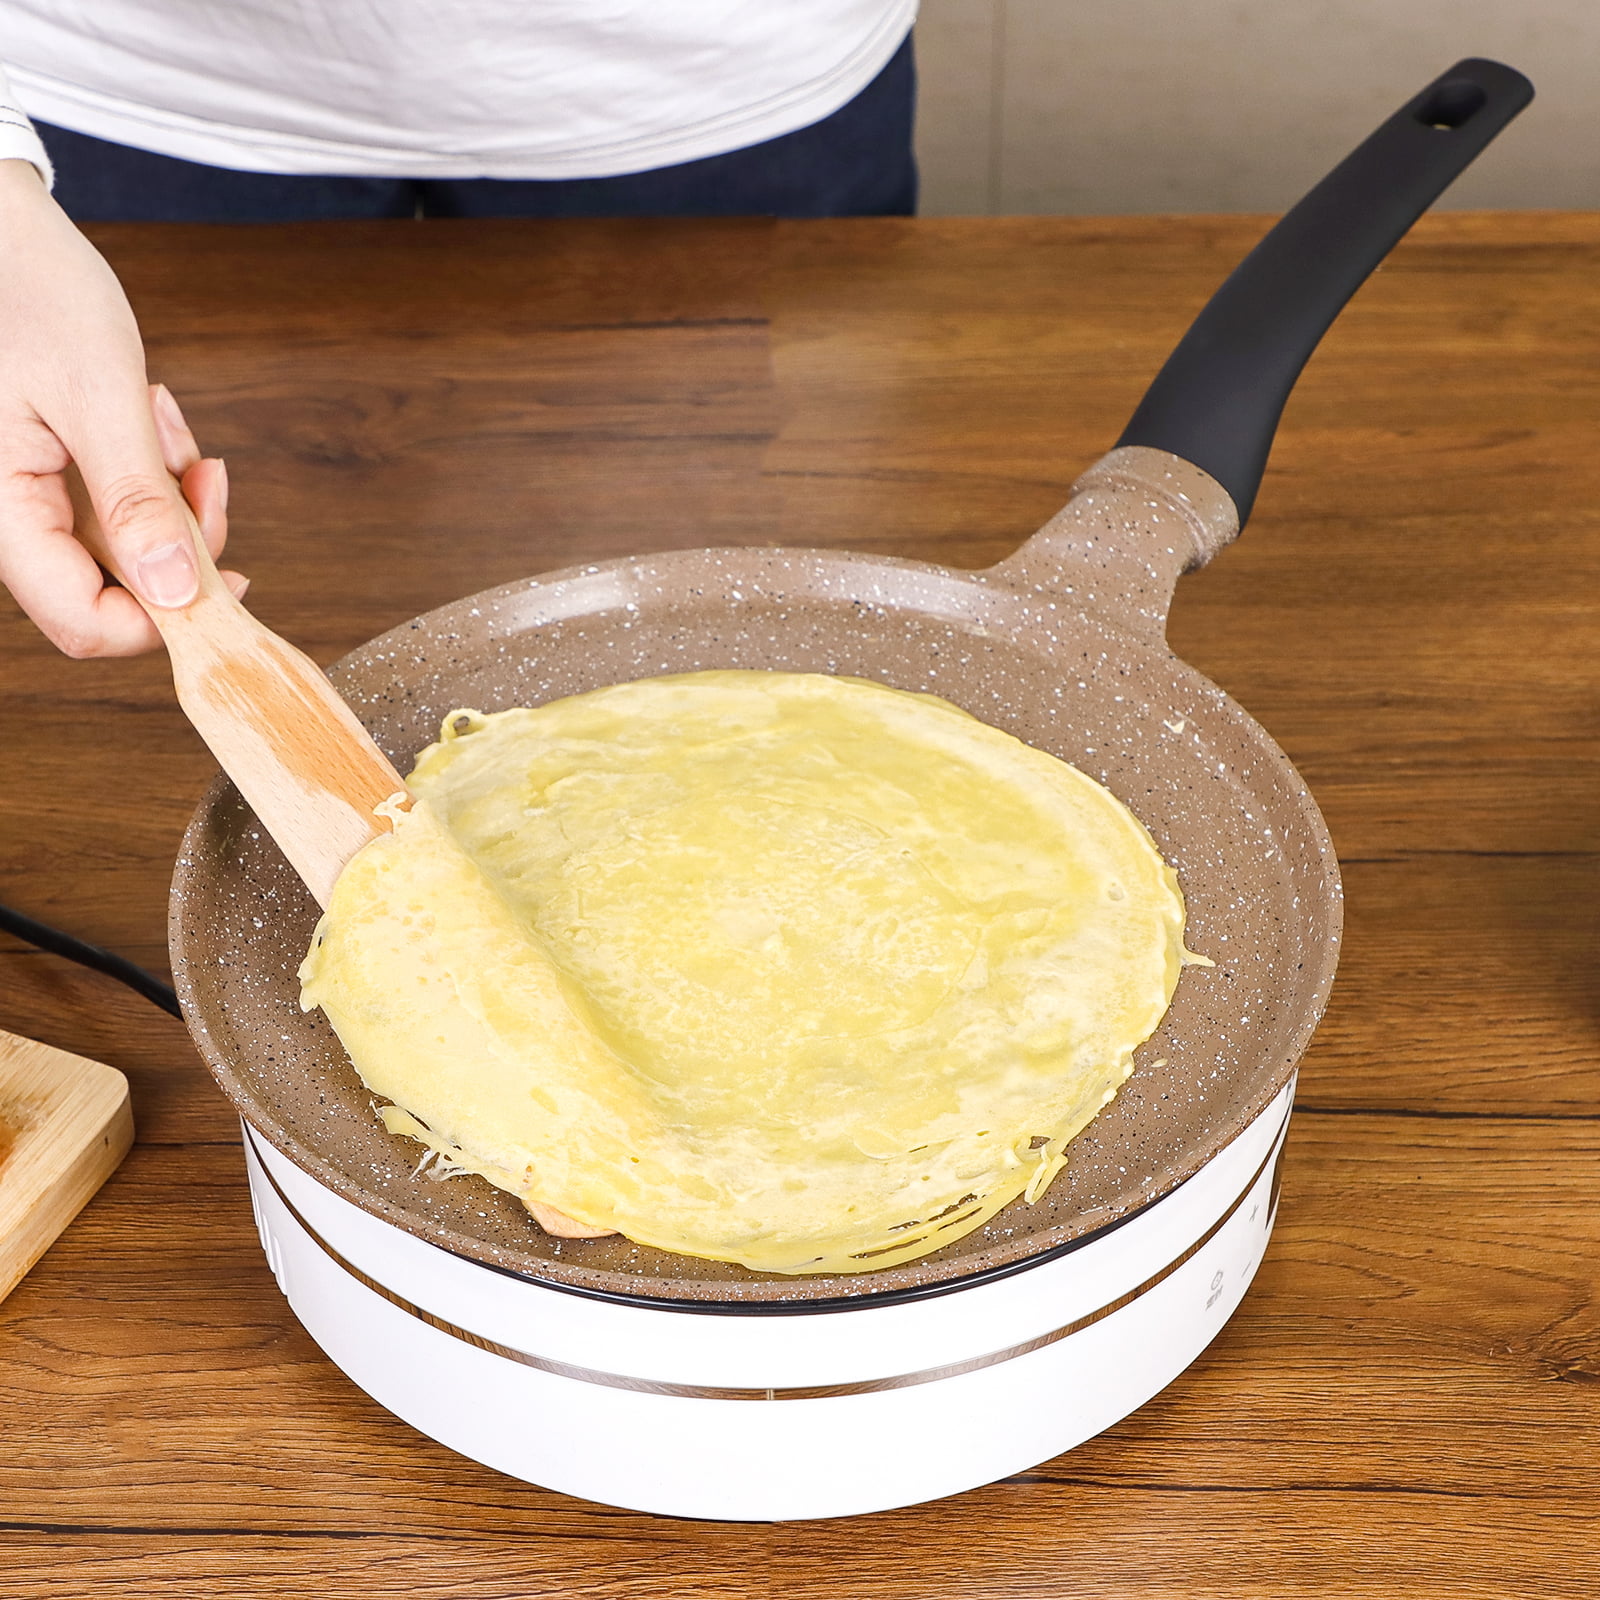 ESLITE LIFE 11 Inch Nonstick Crepe Pan for Stove Top Tortilla Dose